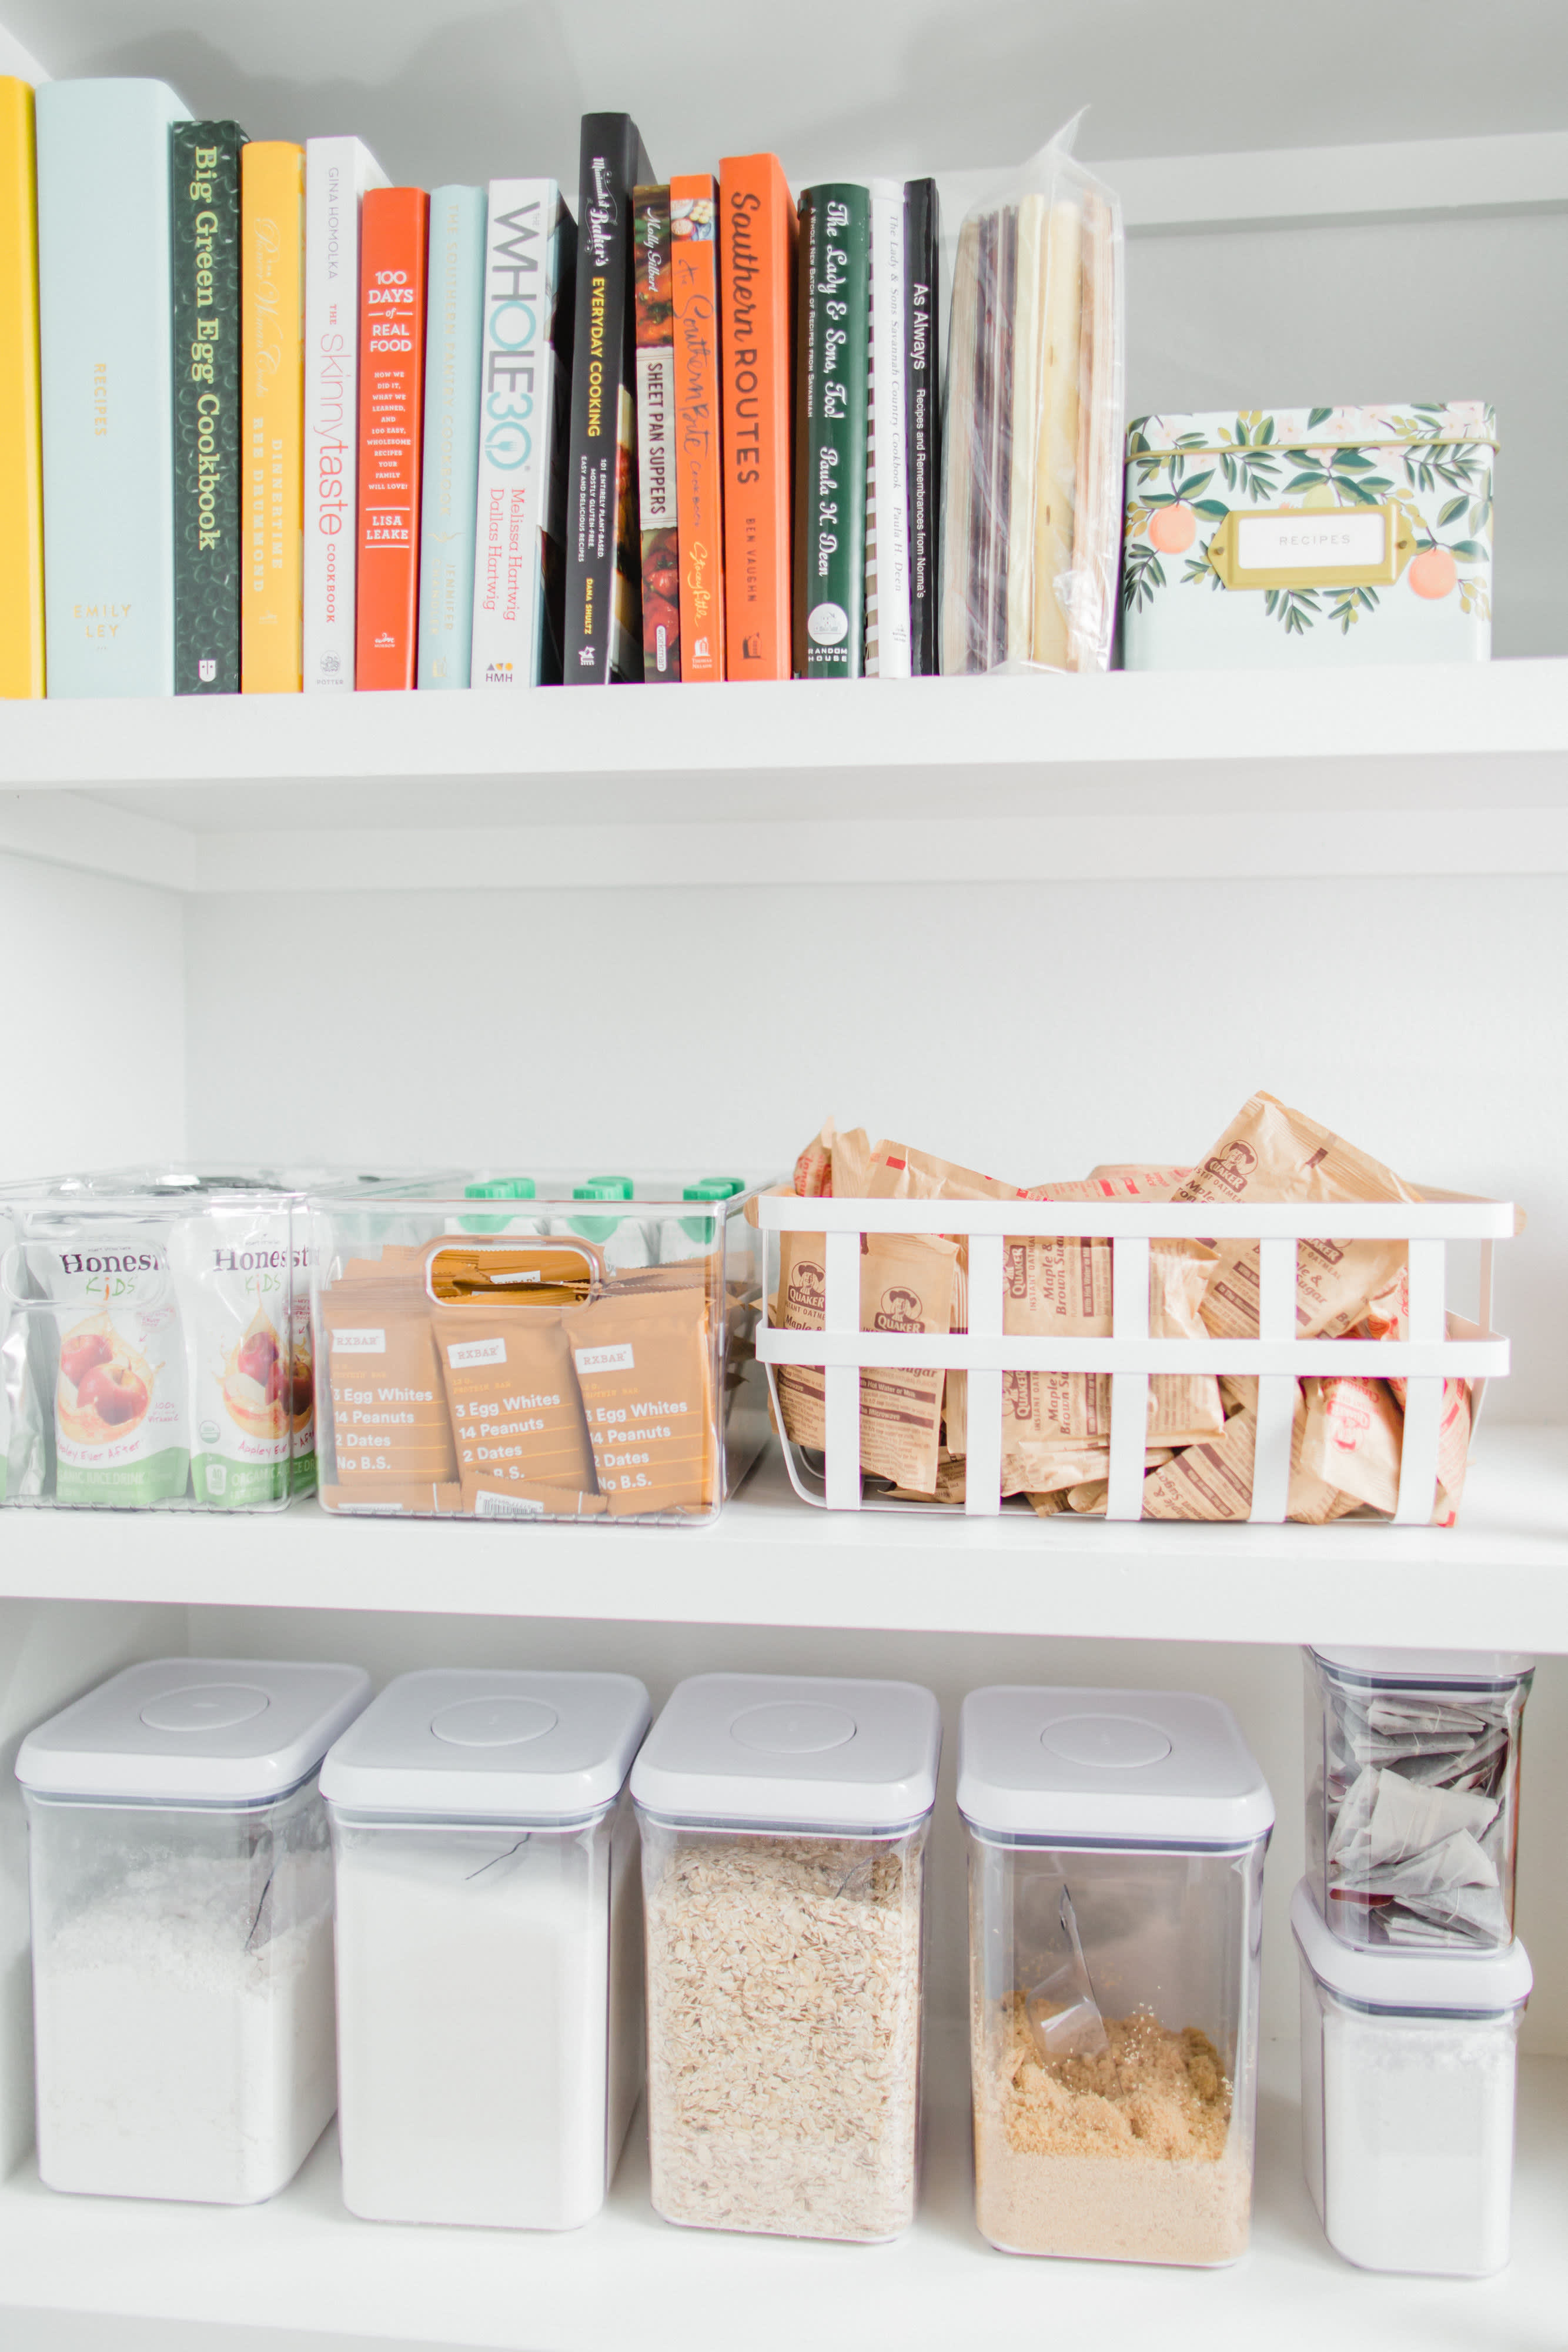 10 Walk-In Pantry Ideas - Designing the Perfect Storage for Your Kitchen -  Melanie Jade Design